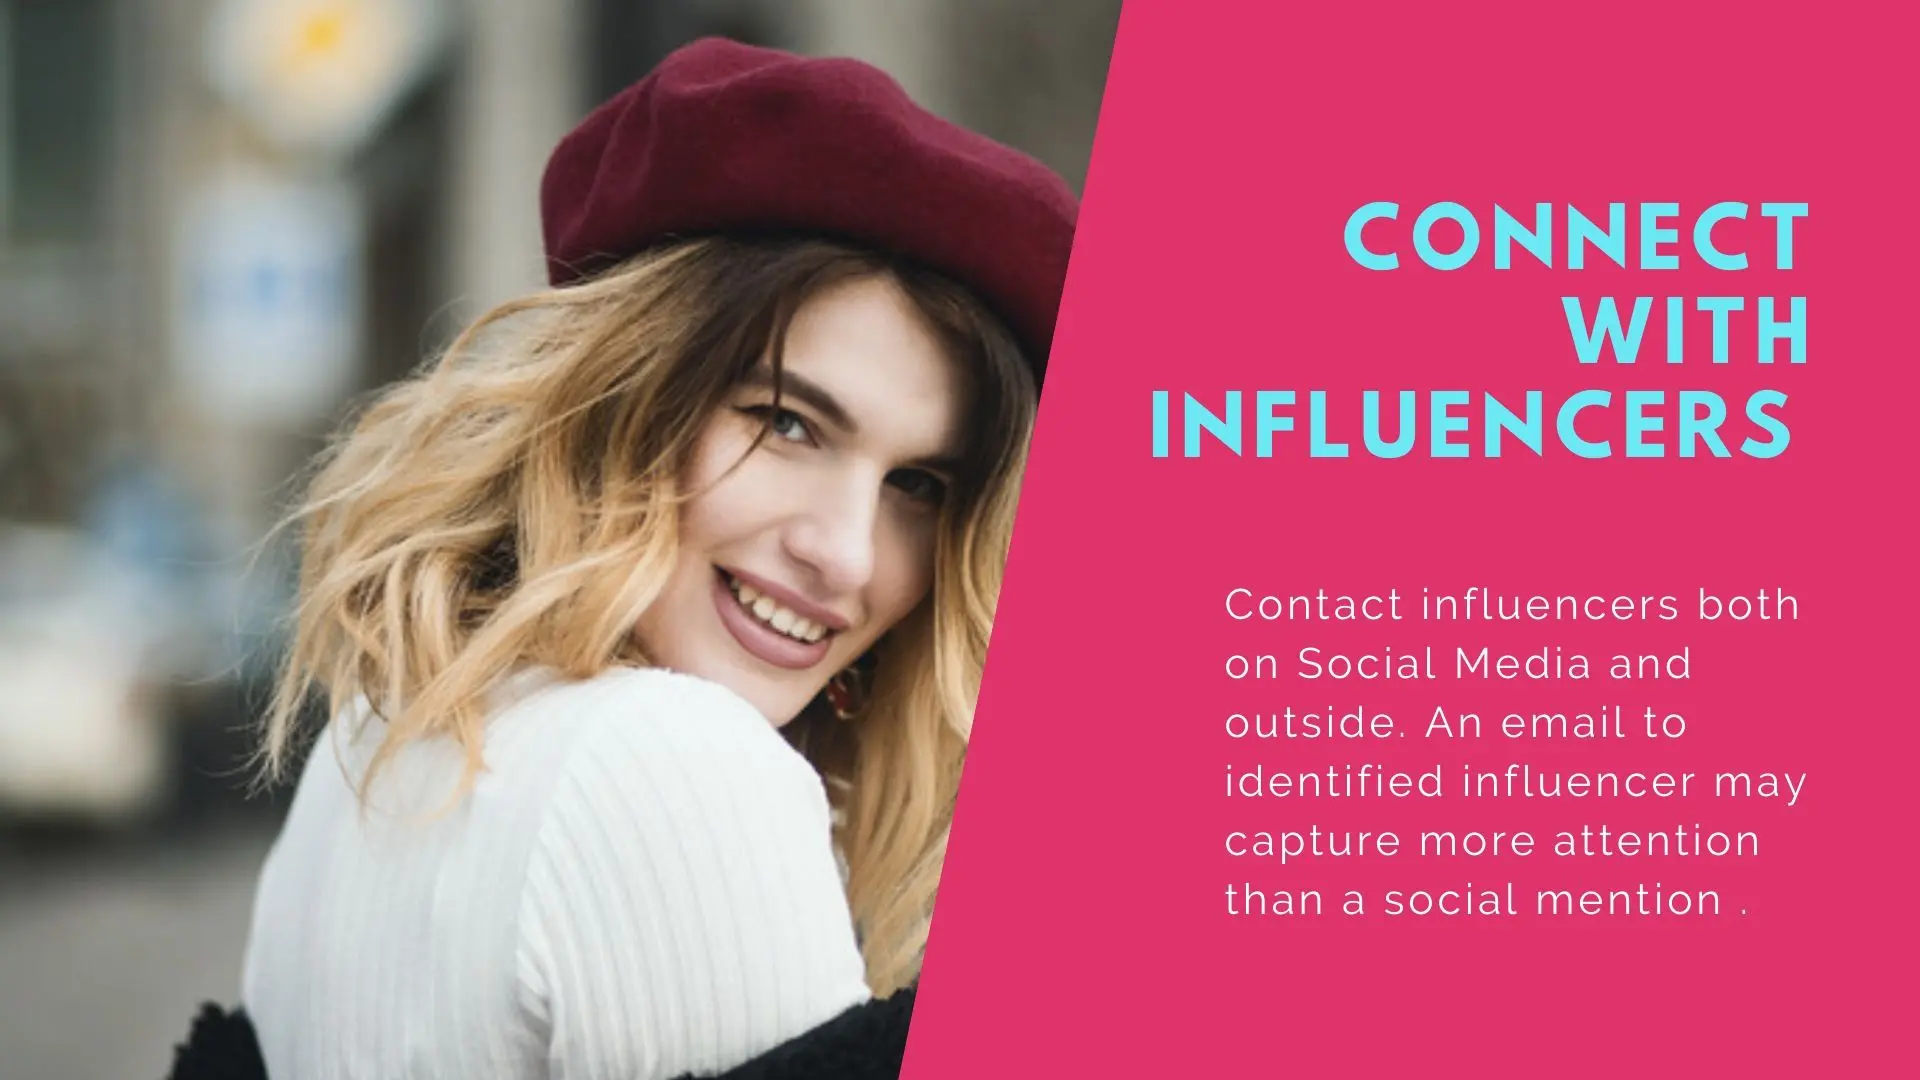 Content - Connect with influencers